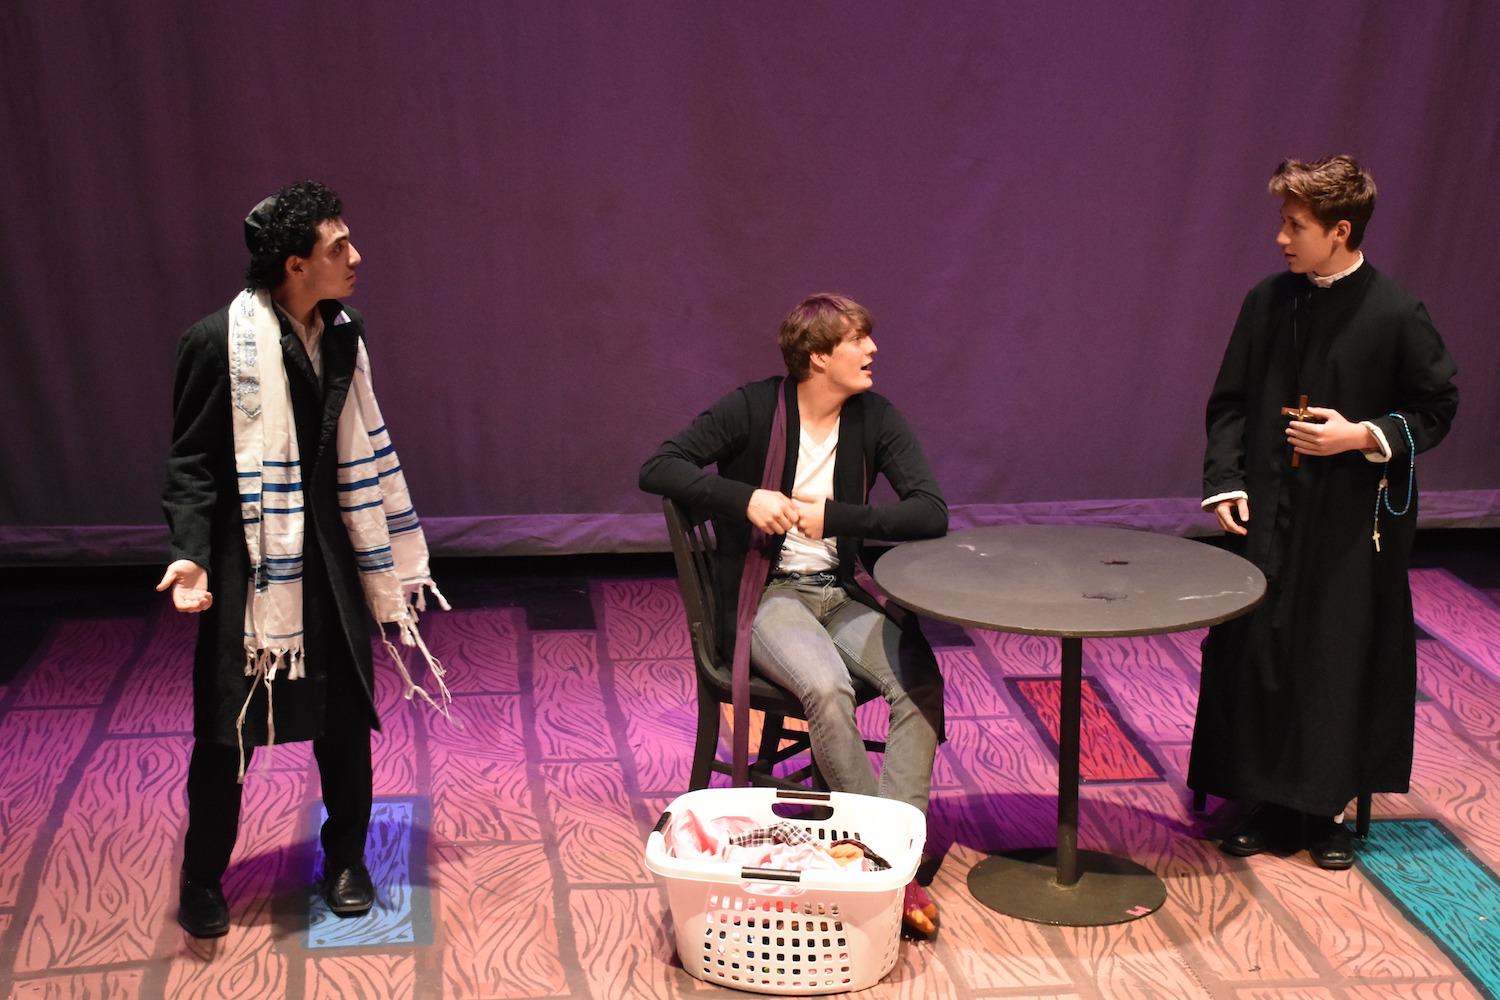 Lincoln students act in Durang Durang, a student-directed compilation of six short acts.